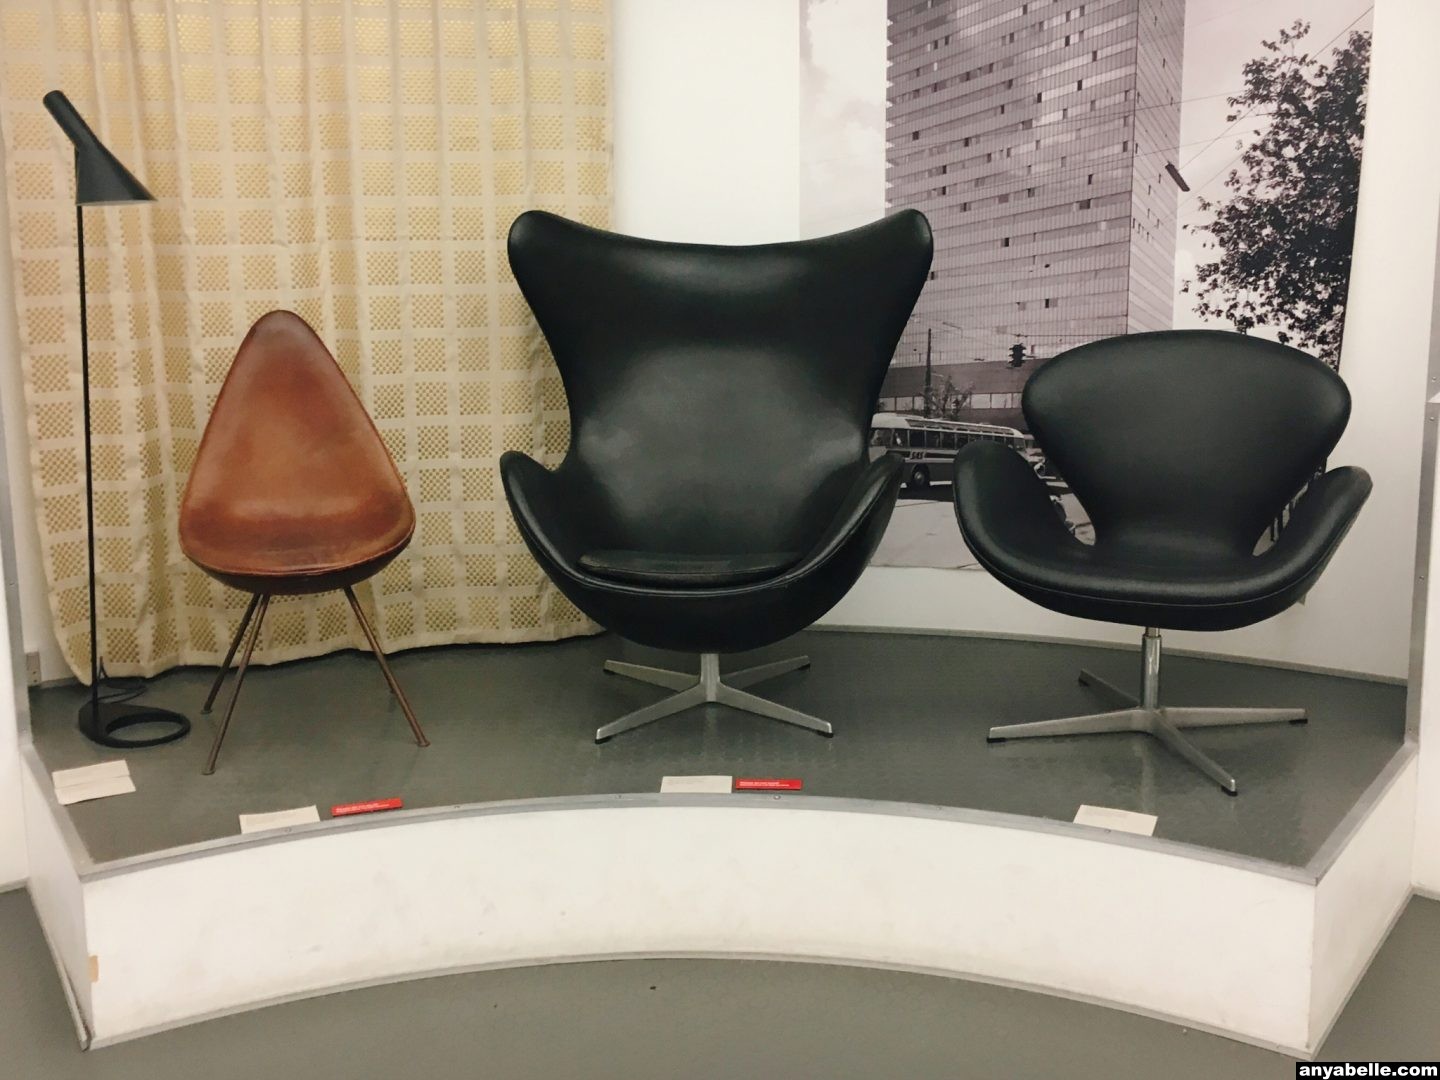 Arne Jacobsen chairs displayed in the exhibition "Danish Design Now"